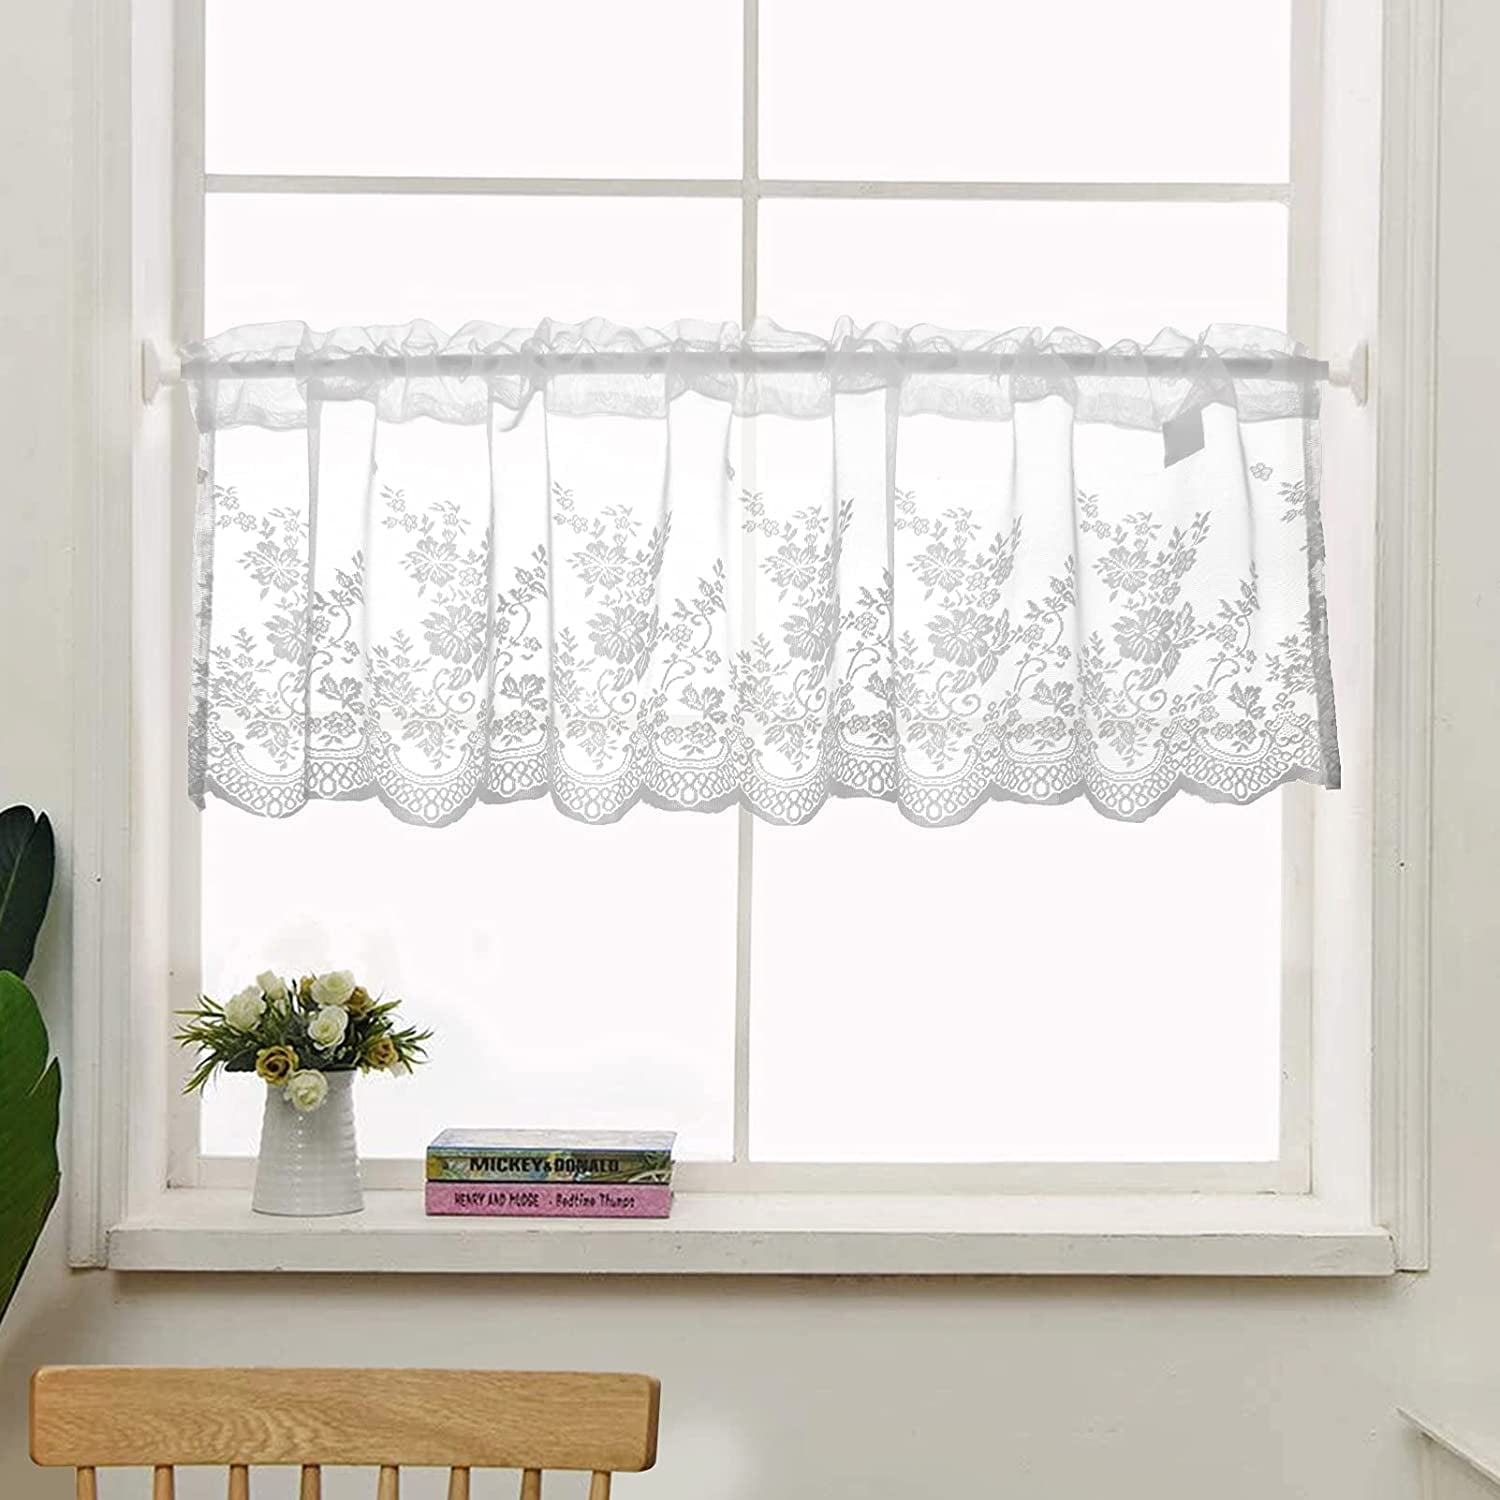 Romantic Embroidered Lace Kitchen Short Curtains Window Valance Sheer Voile 